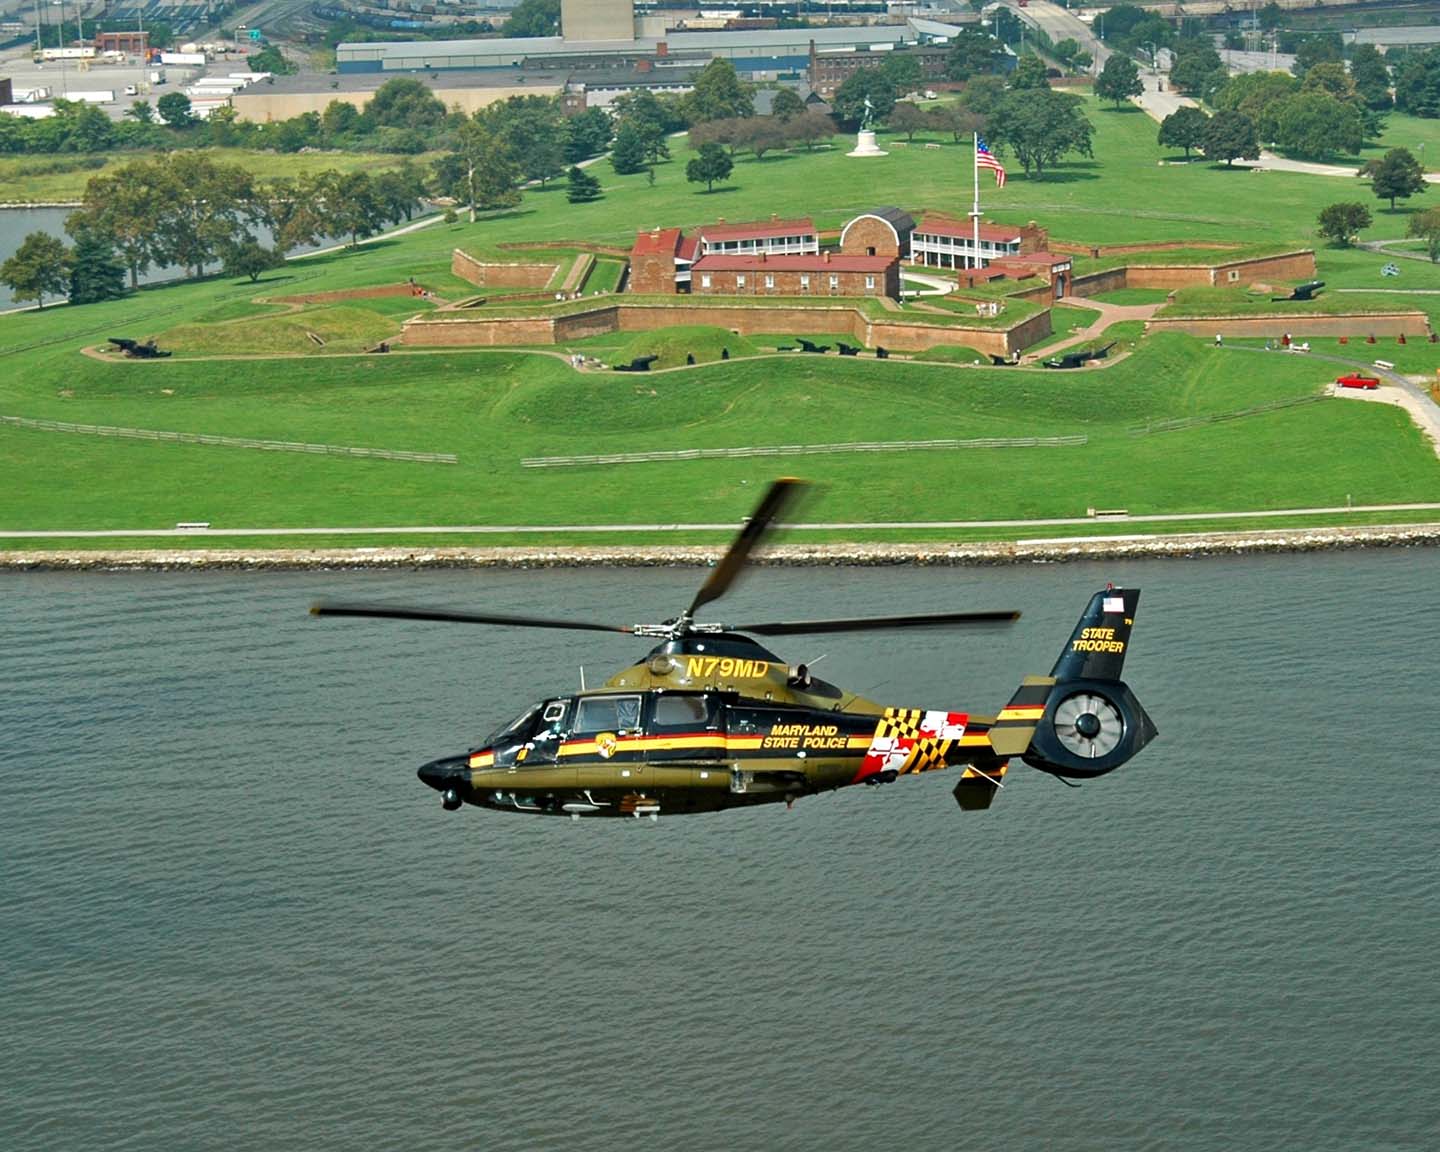 MSP helicopter flies over Ft. McHenry